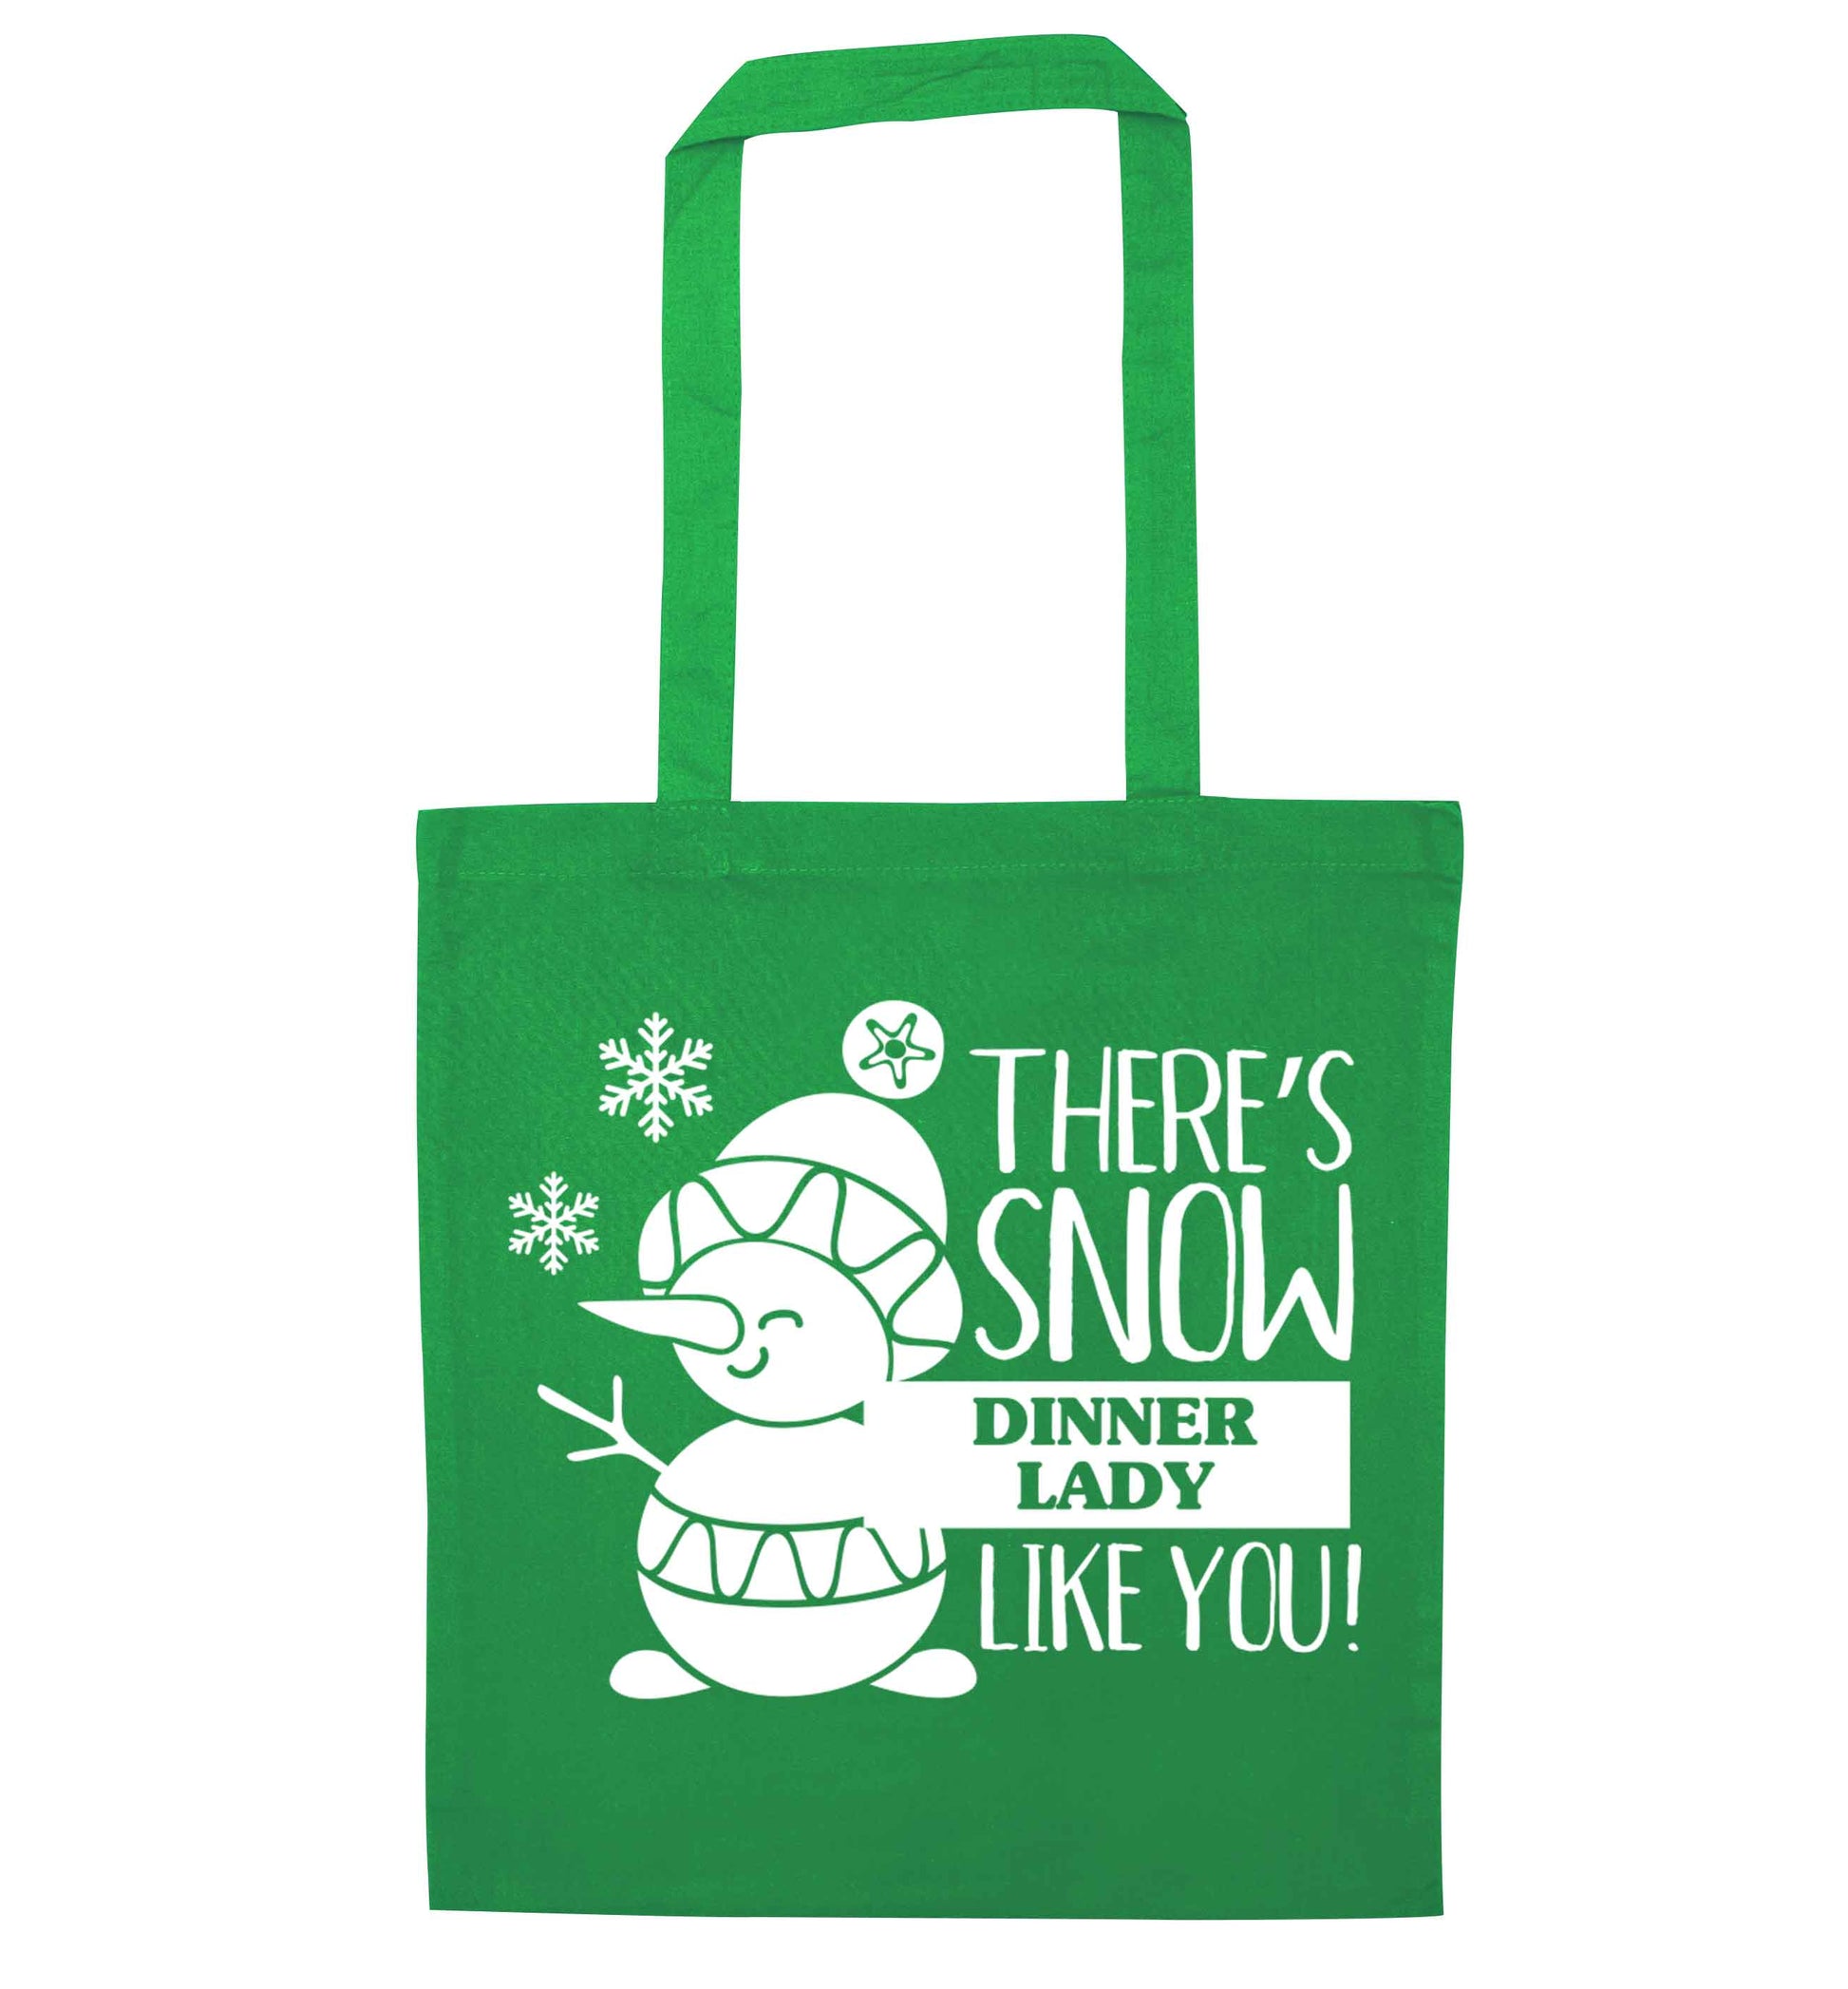 There's snow dinner lady like you green tote bag